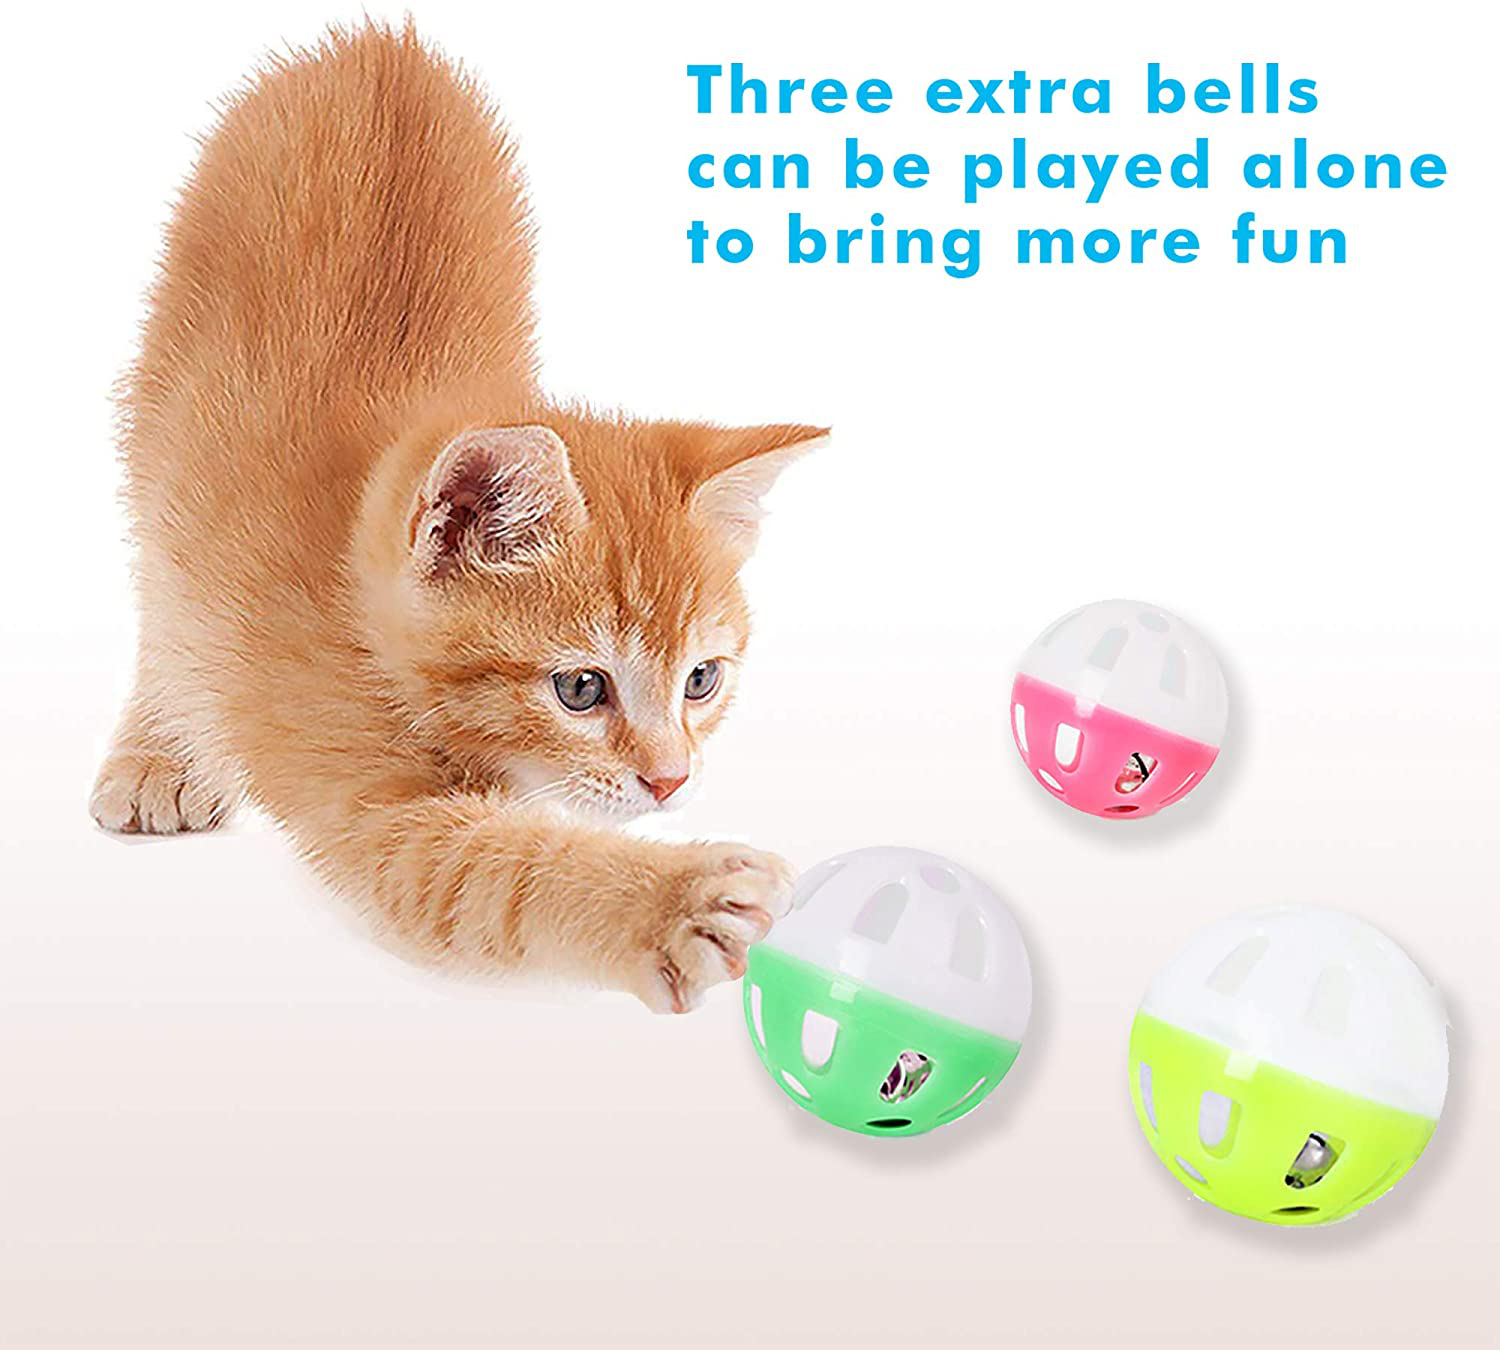 UPSKY Cat Toy Roller 3-Level Turntable Cat Toys Balls with Six Colorful Balls Interactive Kitten Fun Mental Physical Exercise Puzzle Kitten Toys. Animals & Pet Supplies > Pet Supplies > Dog Supplies > Dog Treadmills UPSKY   